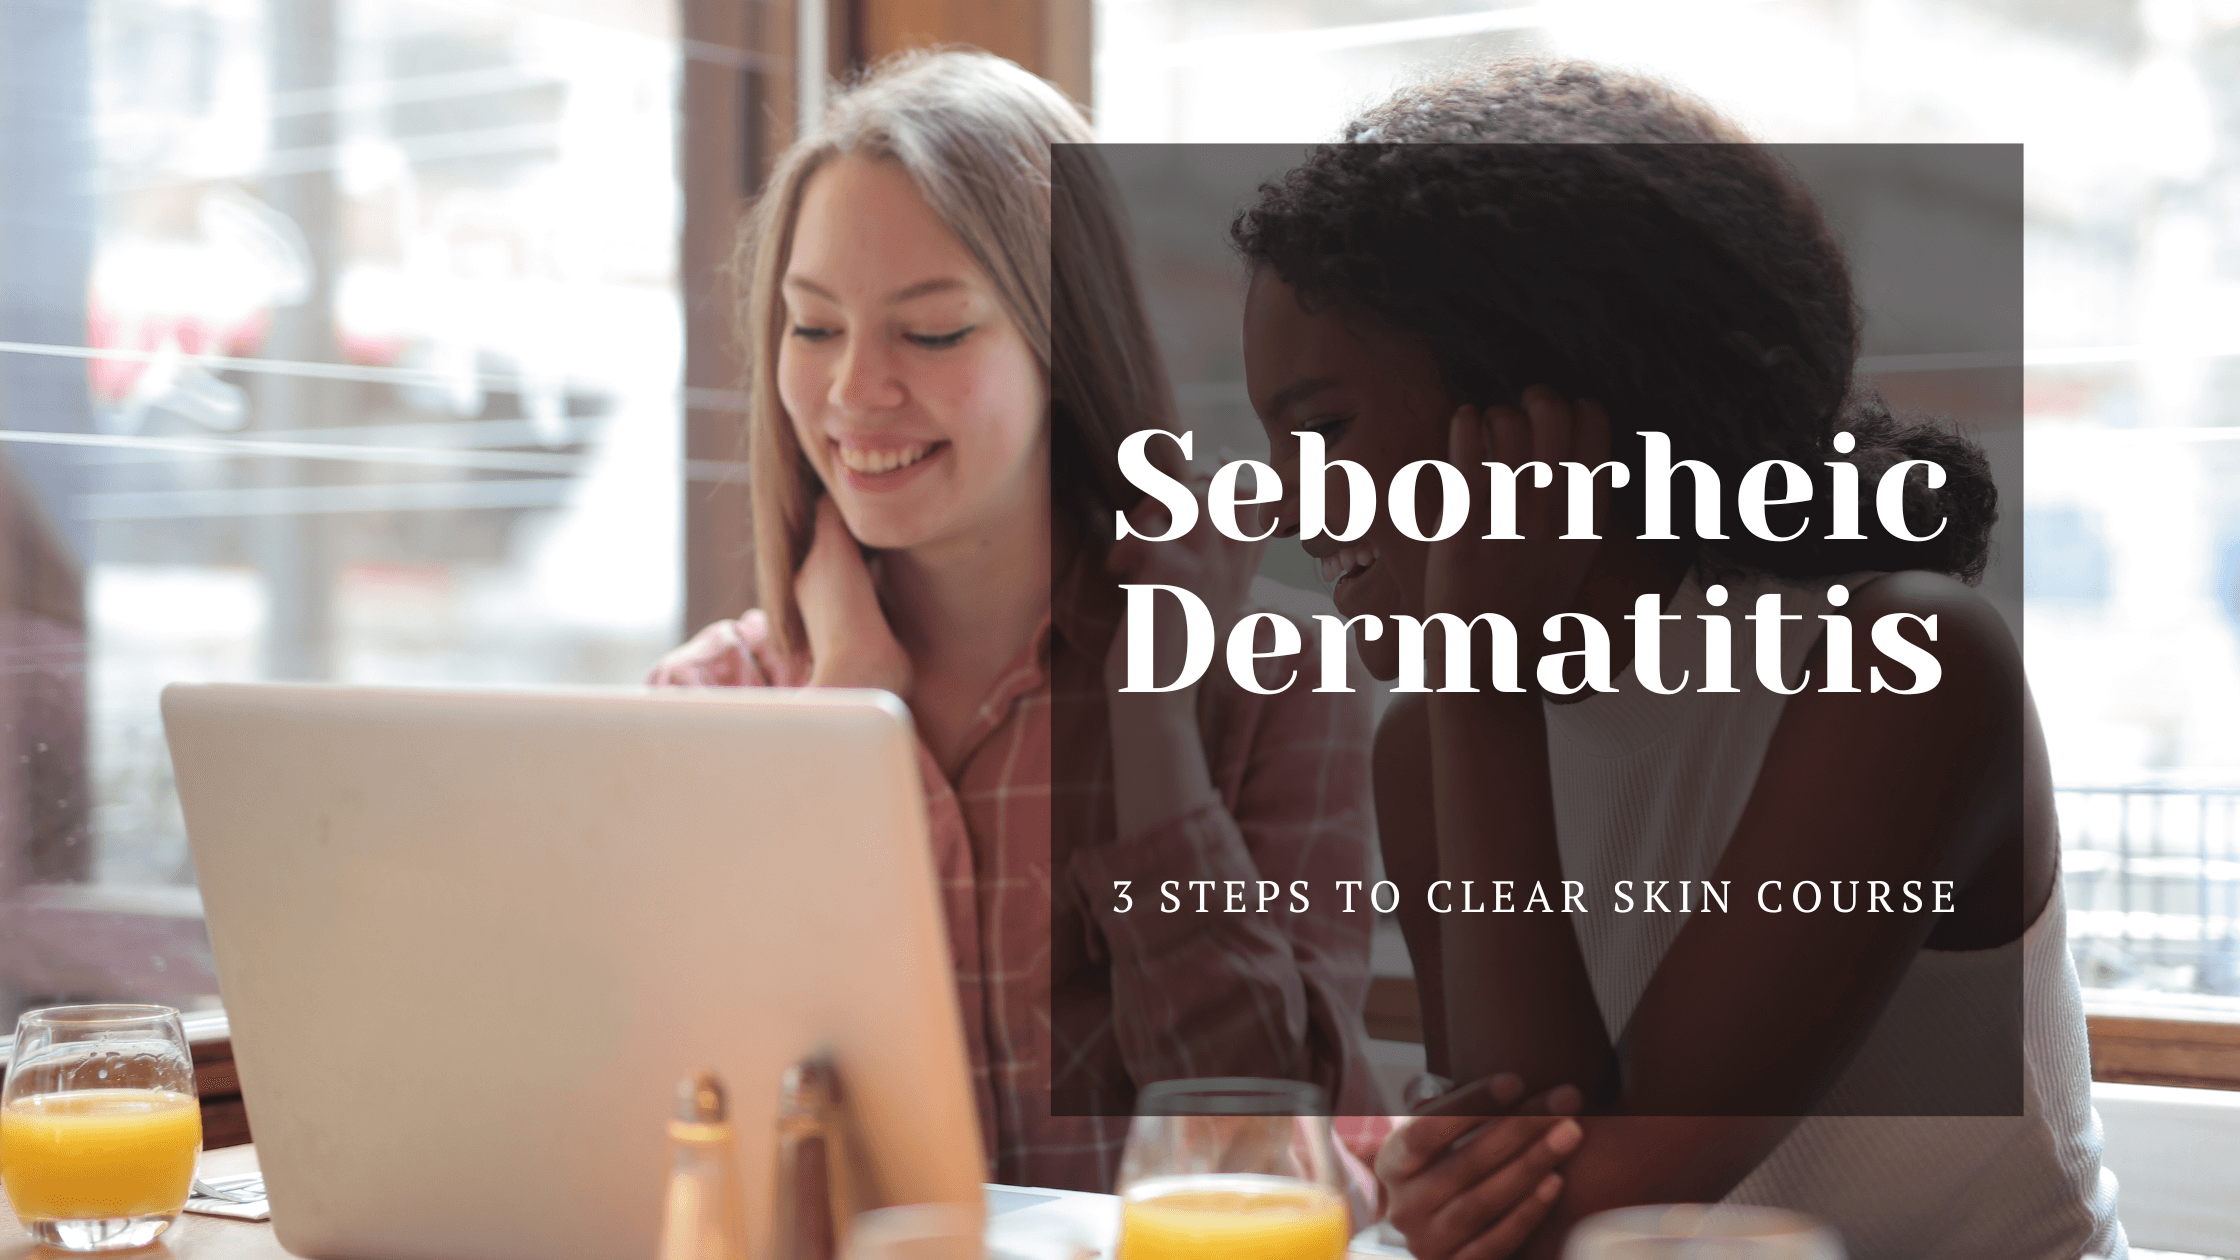 Seborrheic Dermatitis, picture of 2 women looking at computer, excited about the new Seborrheic Dermatitis: 3-Steps to Clear Skin Course